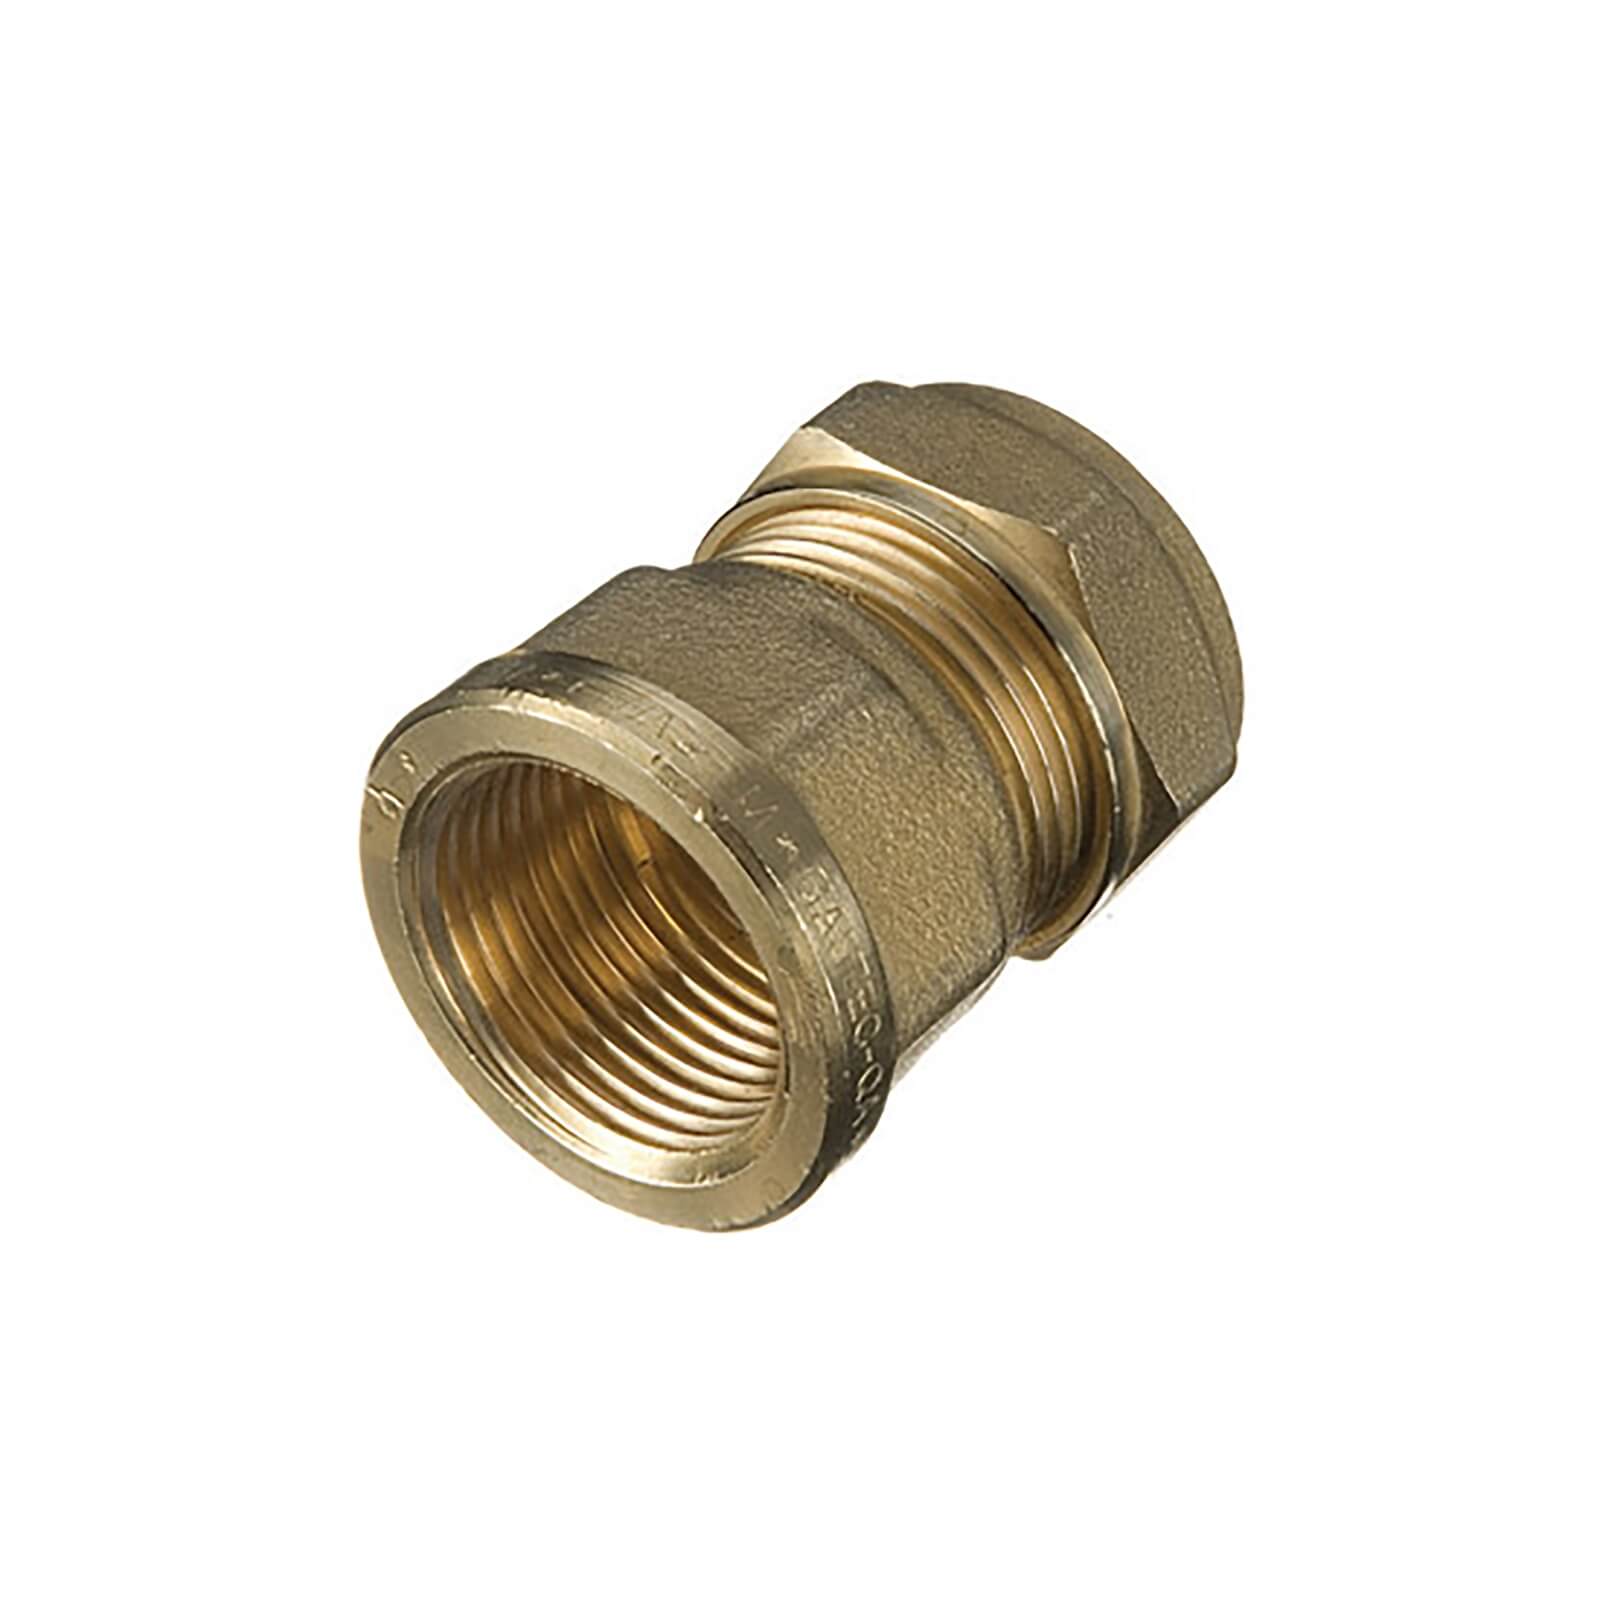 Compression Female Coupler 15mm x 0.75in